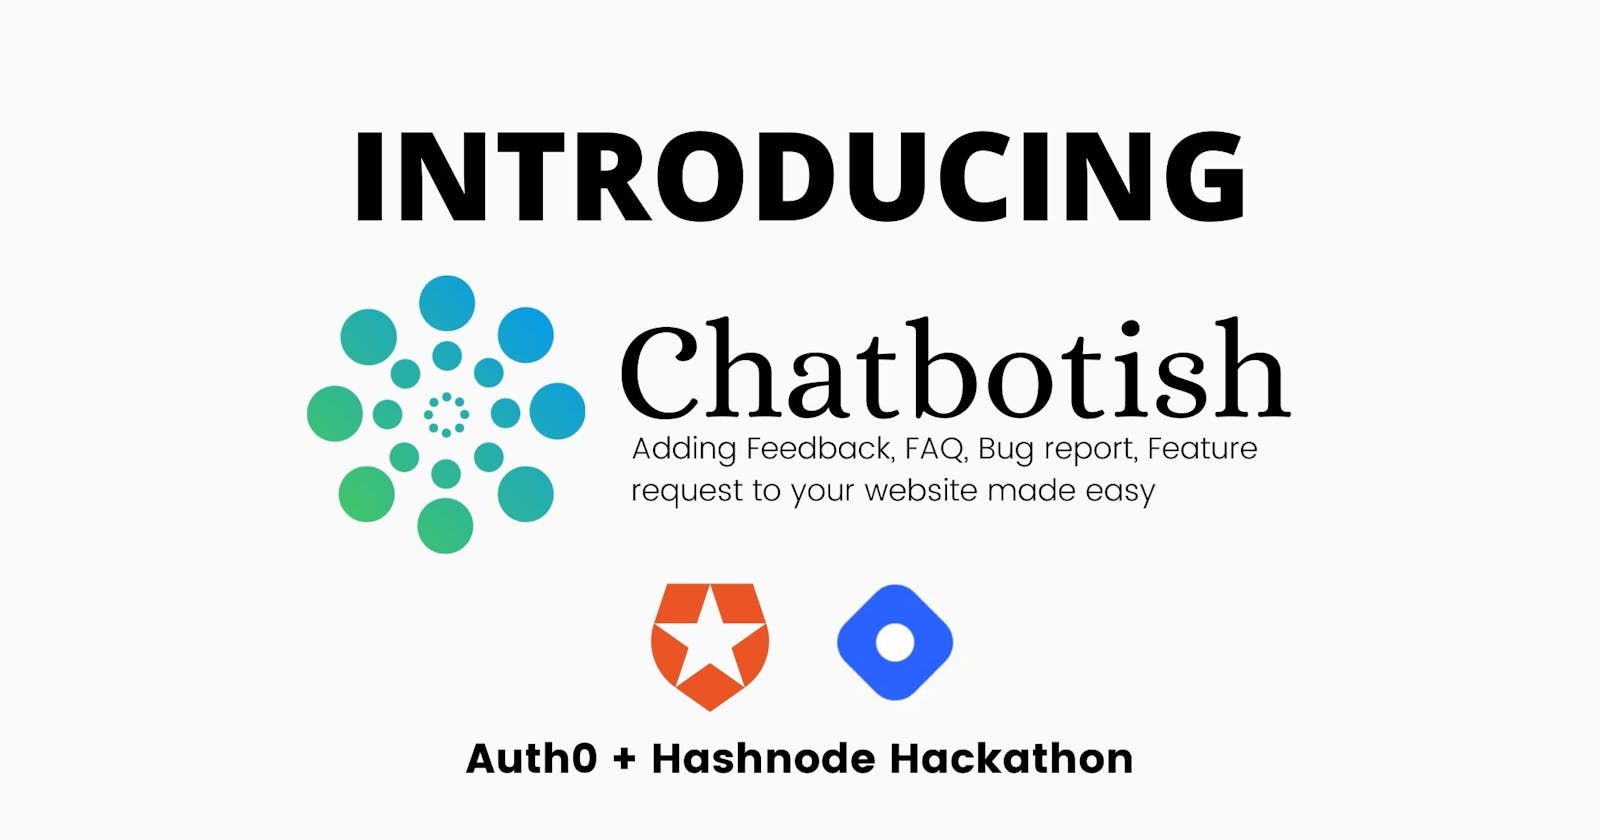 Increase user engagement with Chatbotish.